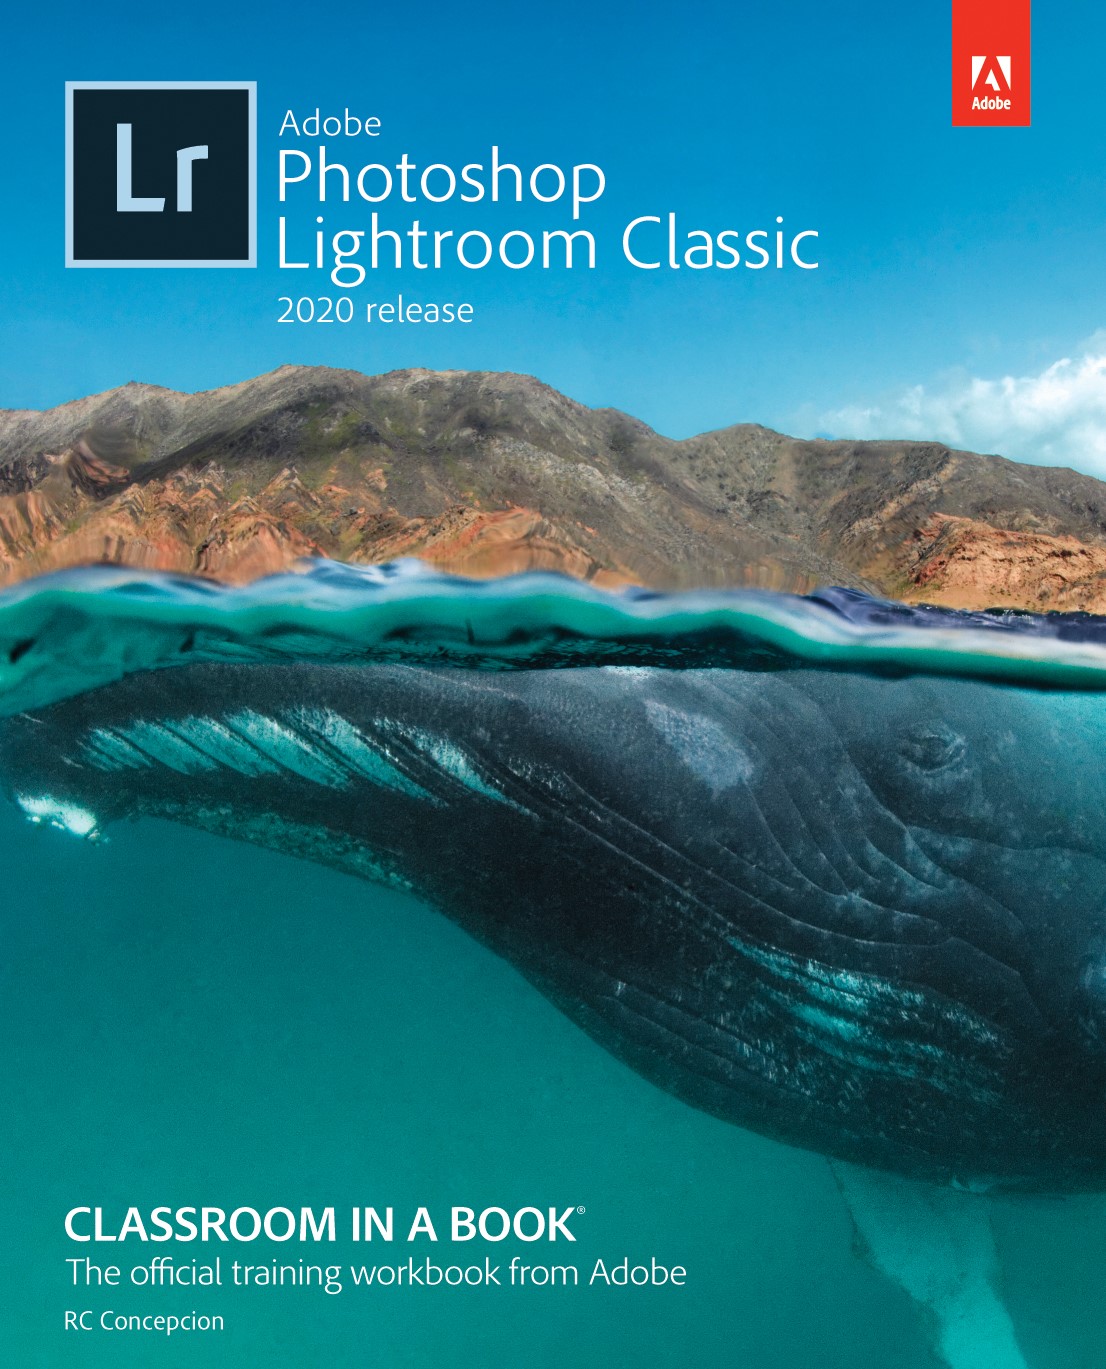 Adobe Photoshop Lightroom Classic Classroom in a Book (2020 release) (Web Edition)